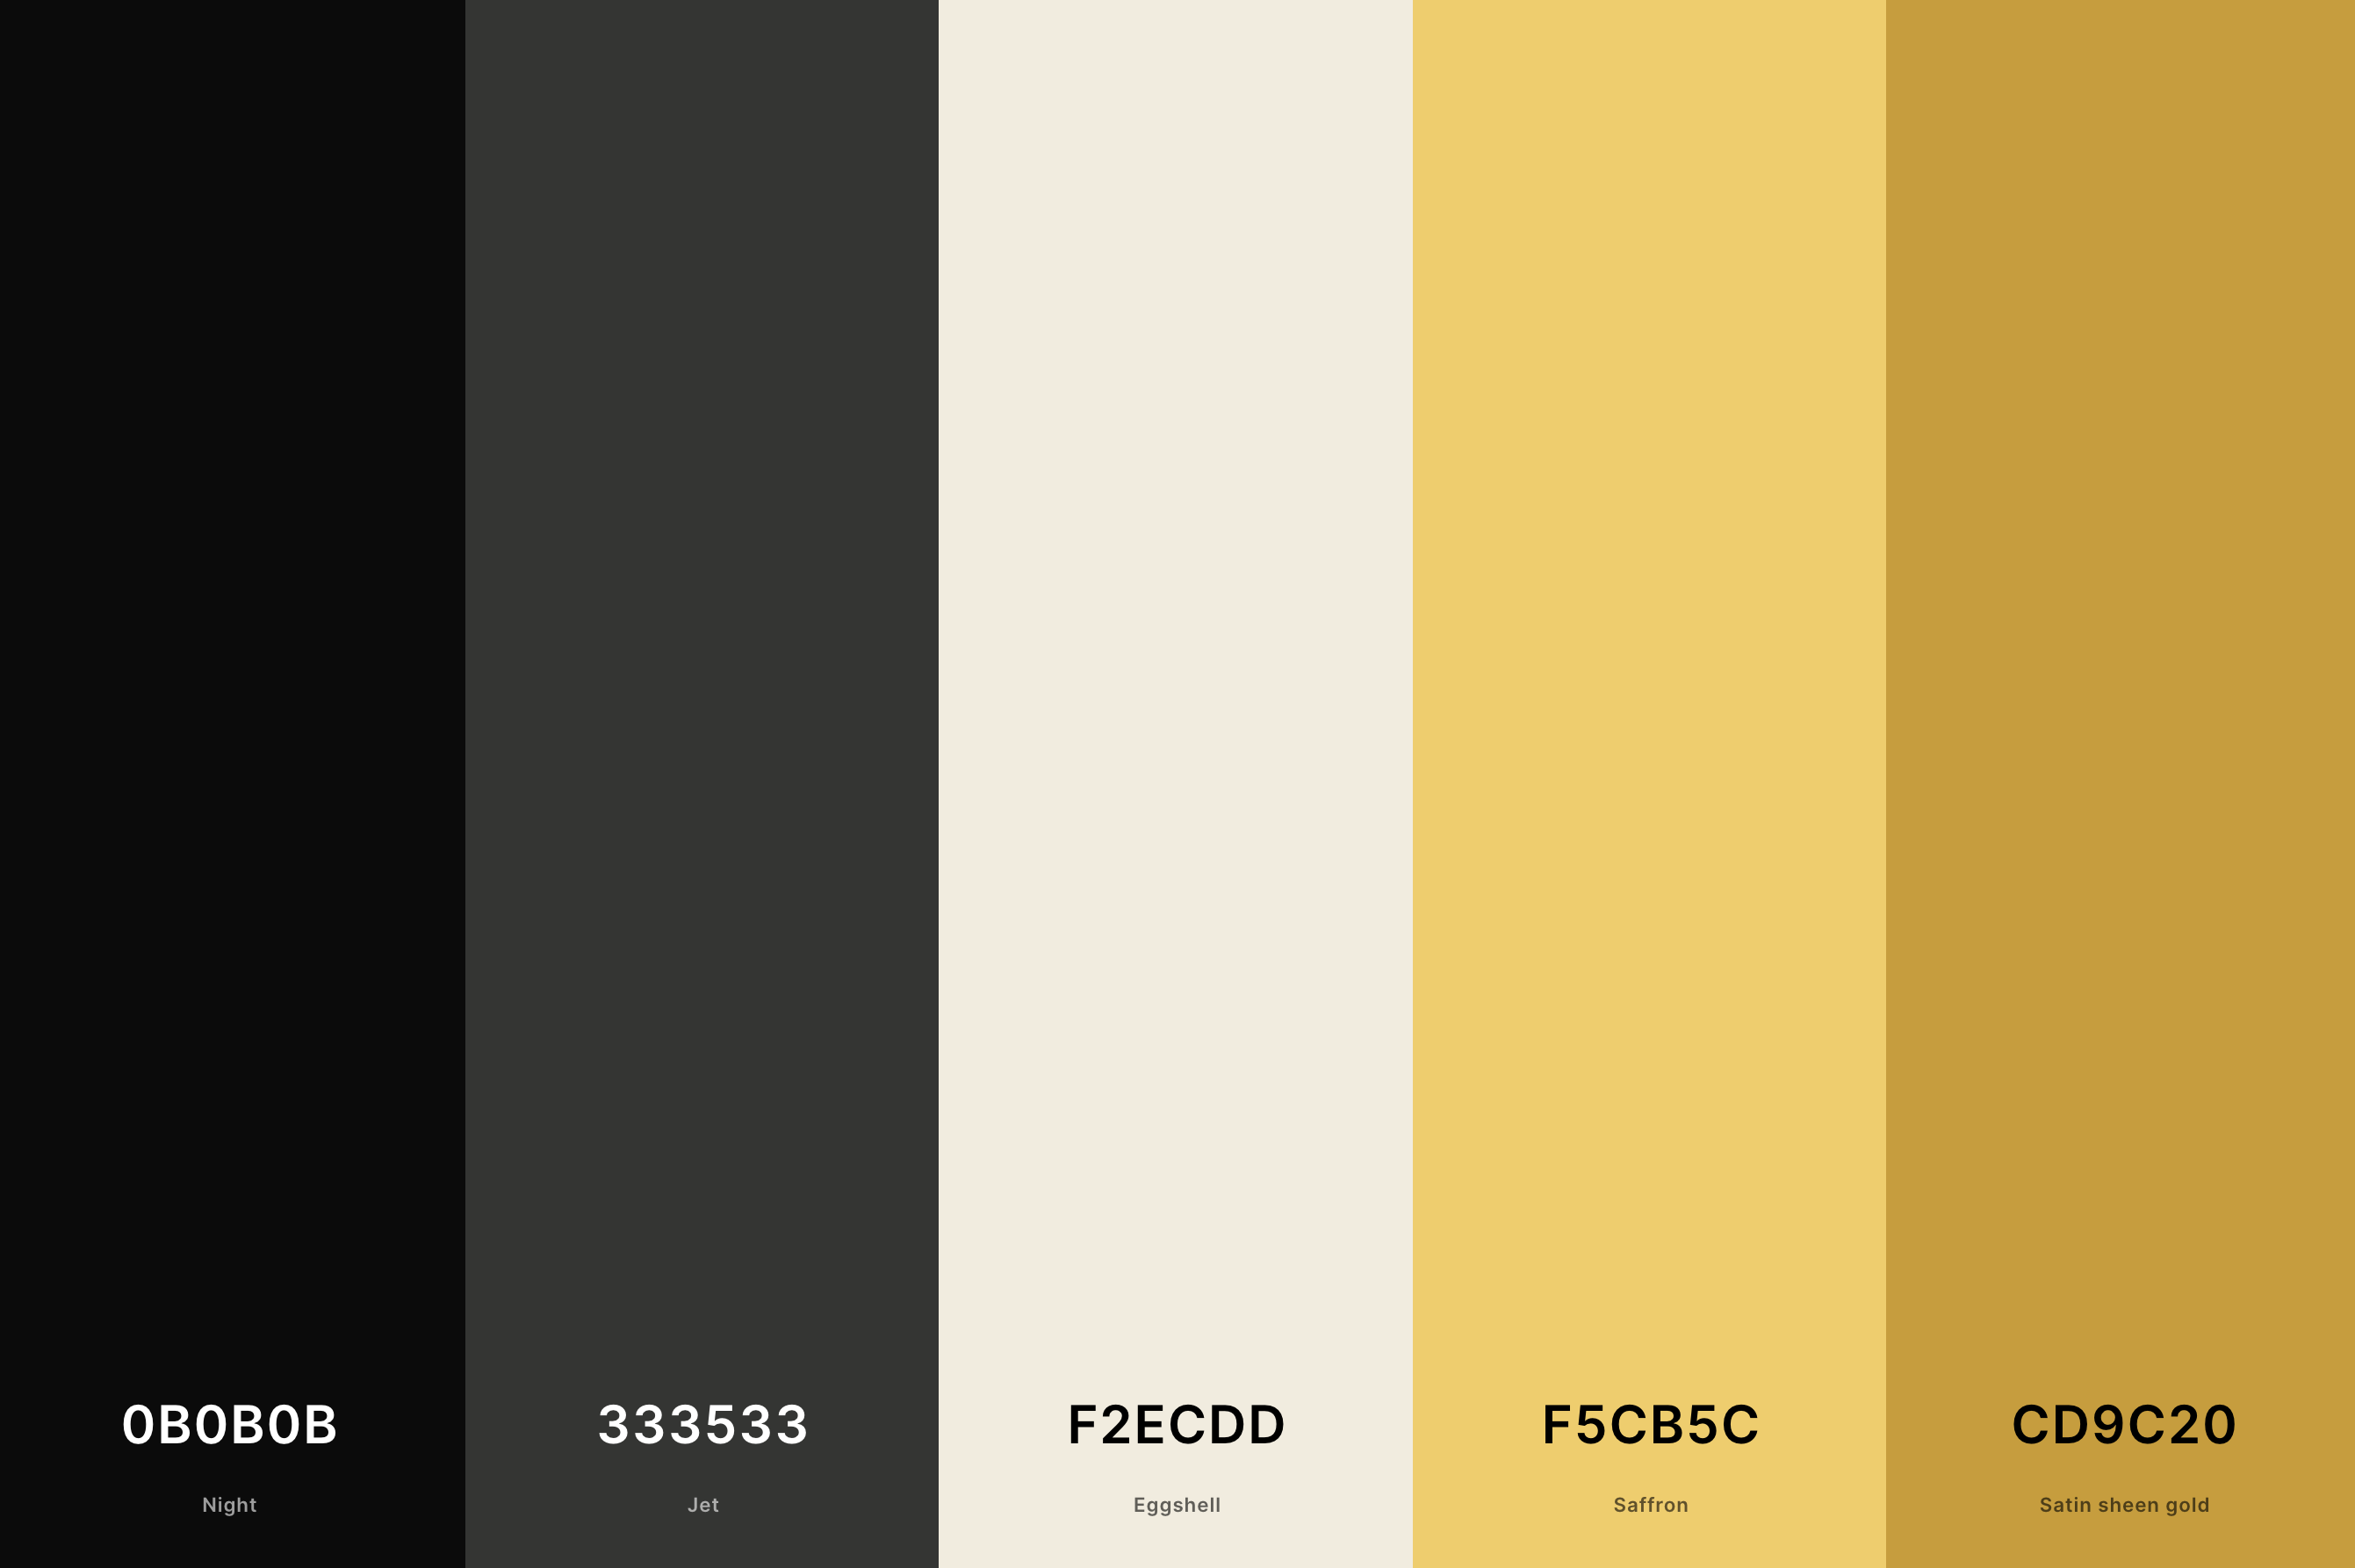 3. Black And Gold Color Palette Color Palette with Night (Hex #0B0B0B) + Jet (Hex #333533) + Eggshell (Hex #F2ECDD) + Saffron (Hex #F5CB5C) + Satin Sheen Gold (Hex #CD9C20) Color Palette with Hex Codes